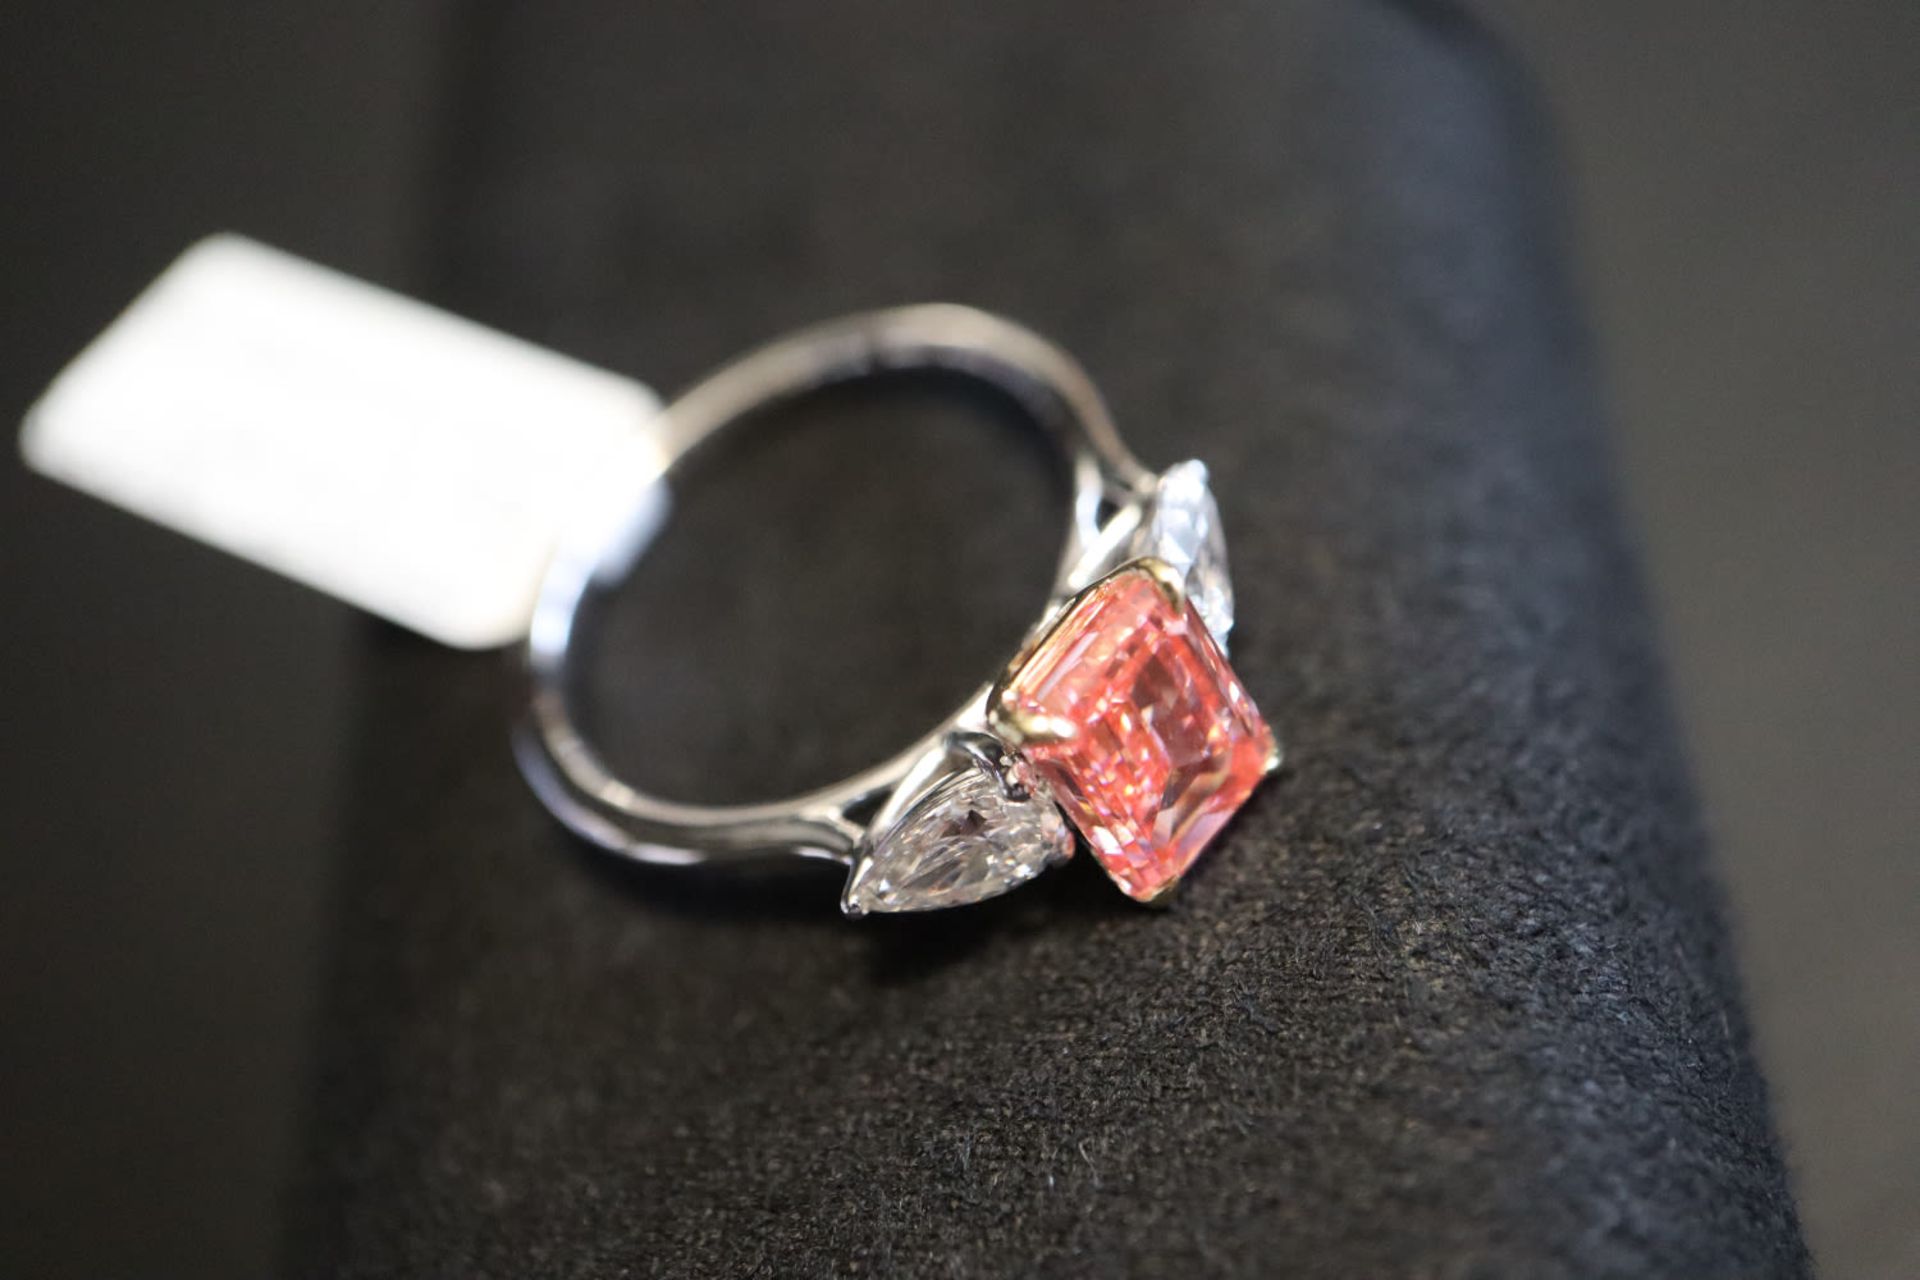 2.71CT PINK & WHITE DIAMOND TRILOGY RING, set in '950' PLATINUM MOUNT (EMERALD & PEAR CUTS) - Image 8 of 14